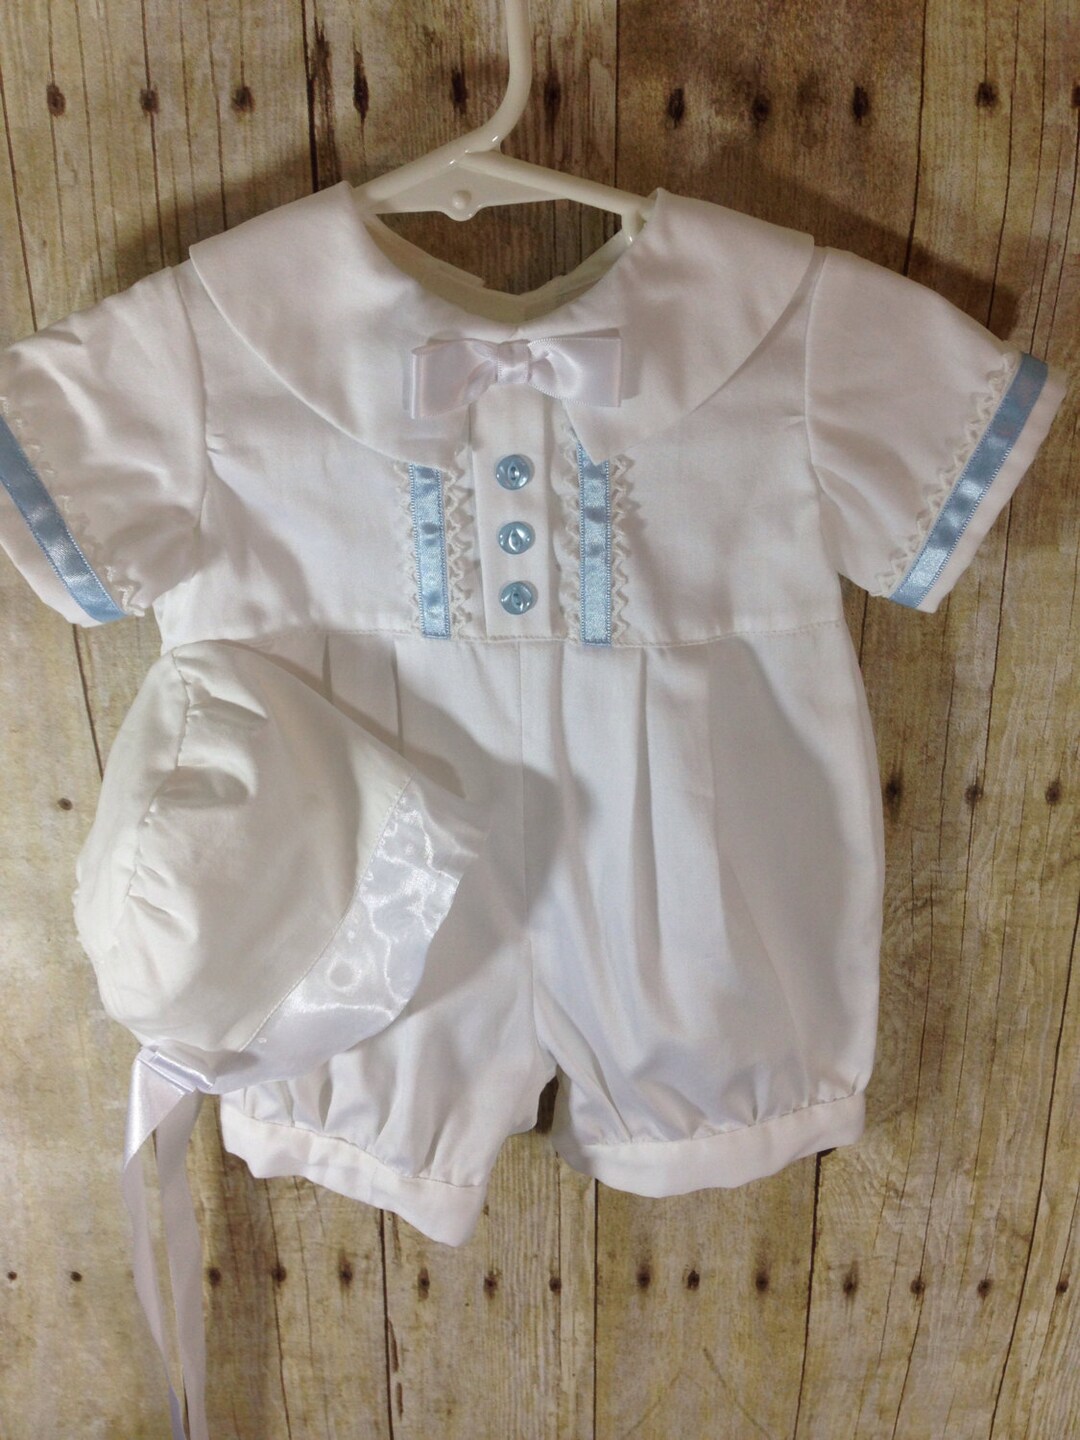 CHRISTENING SUIT Baby Boy Romper With Blue Accent - Etsy